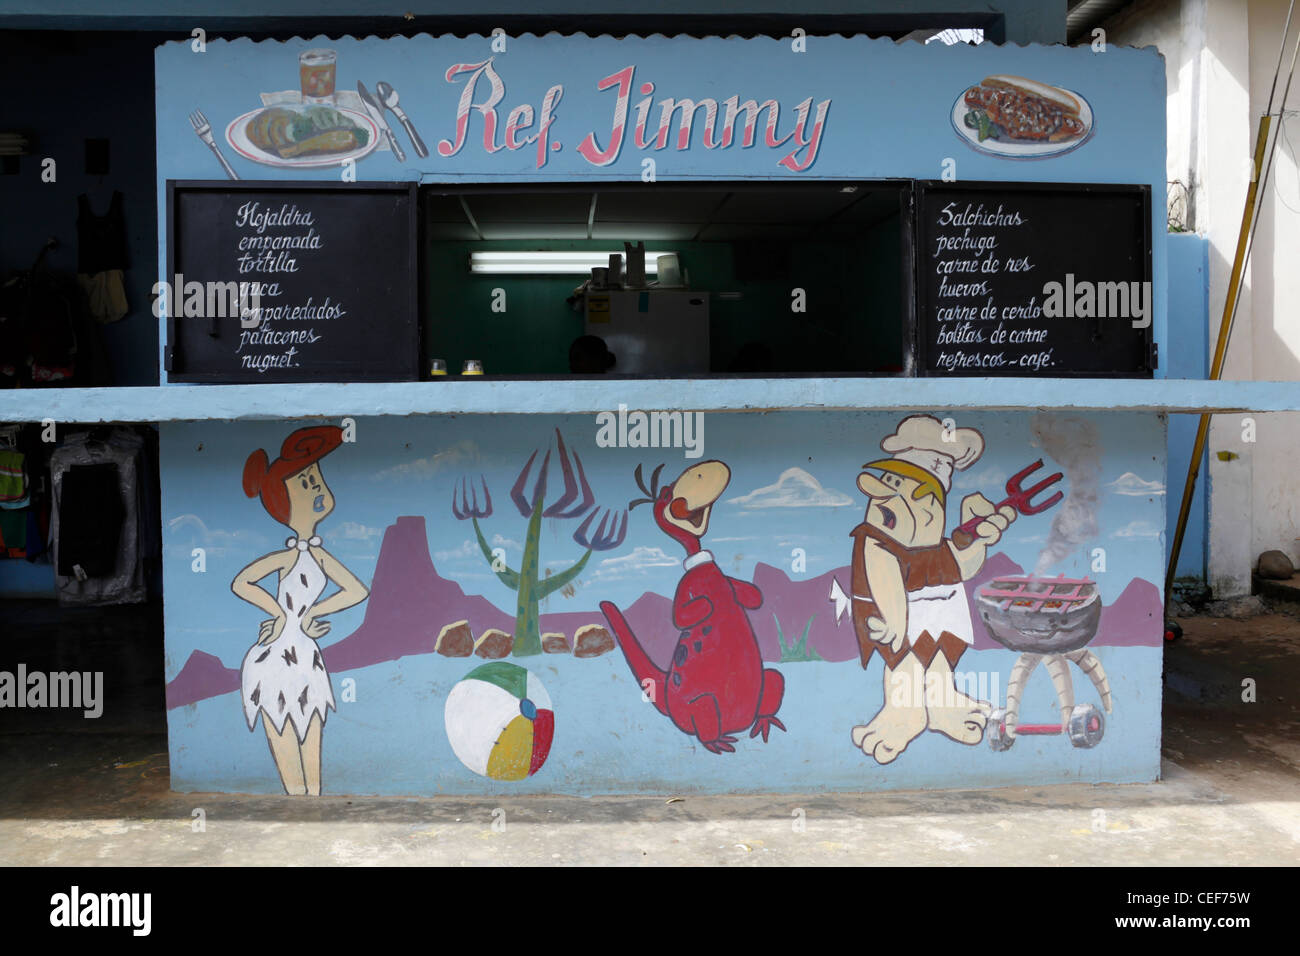 Food kiosk decorated with figures from The Flintstones, near Boquete, Chiriqui province, Panama Stock Photo